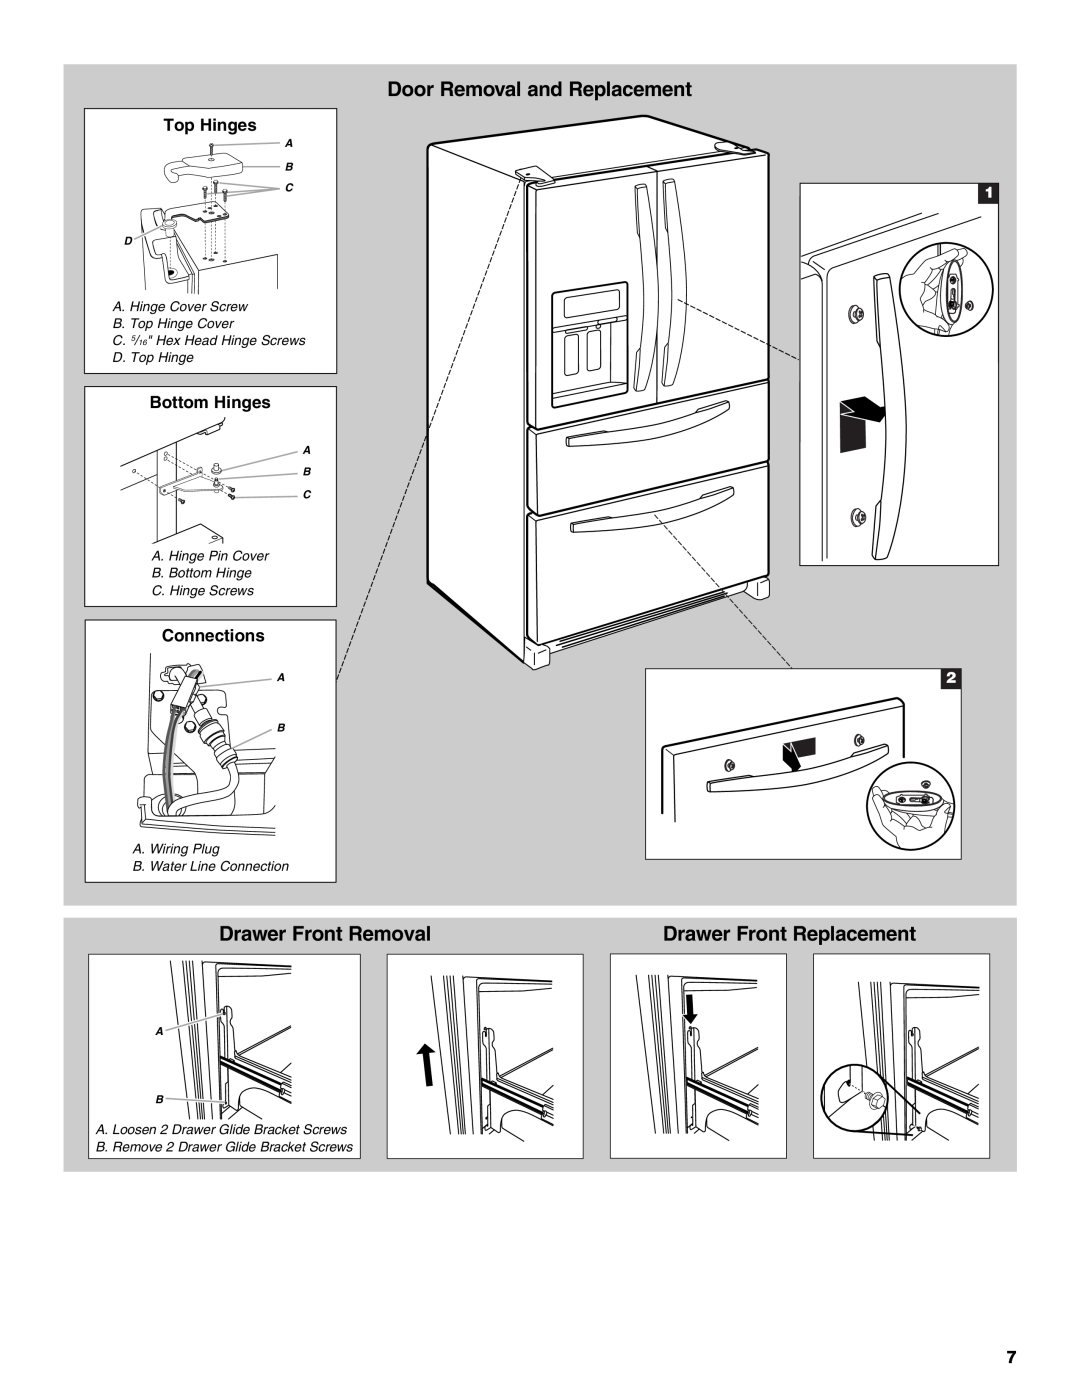 Whirlpool WRX735SDBM Door Removal and Replacement, Drawer Front Removal, Drawer Front Replacement, Top Hinges, Connections 